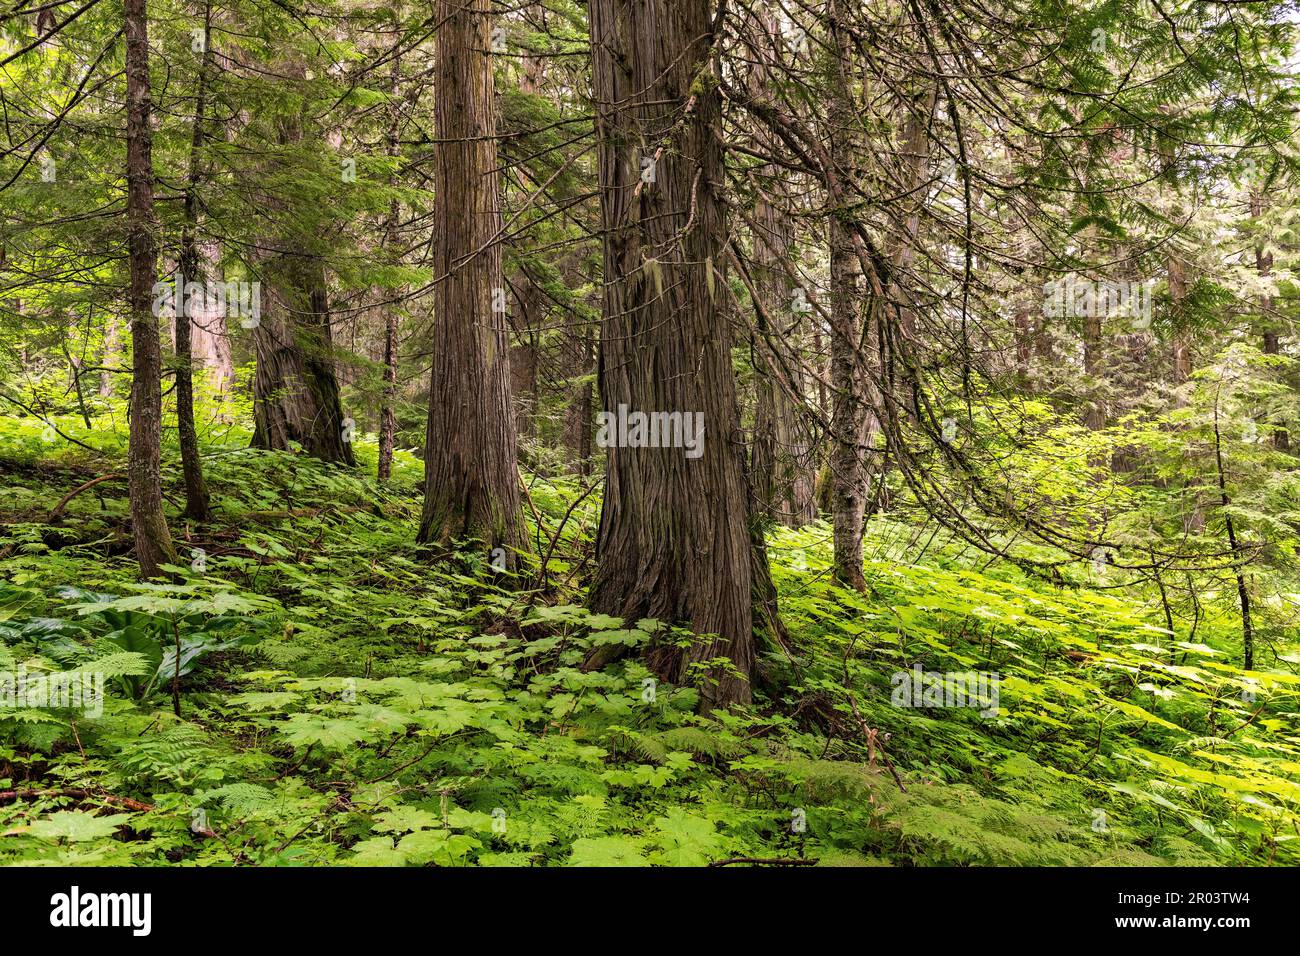 Cedar trees and ferns inside Ancient Forest provincial park, Fraser River Valley near Prince George, British Columbia, Canada. Stock Photo